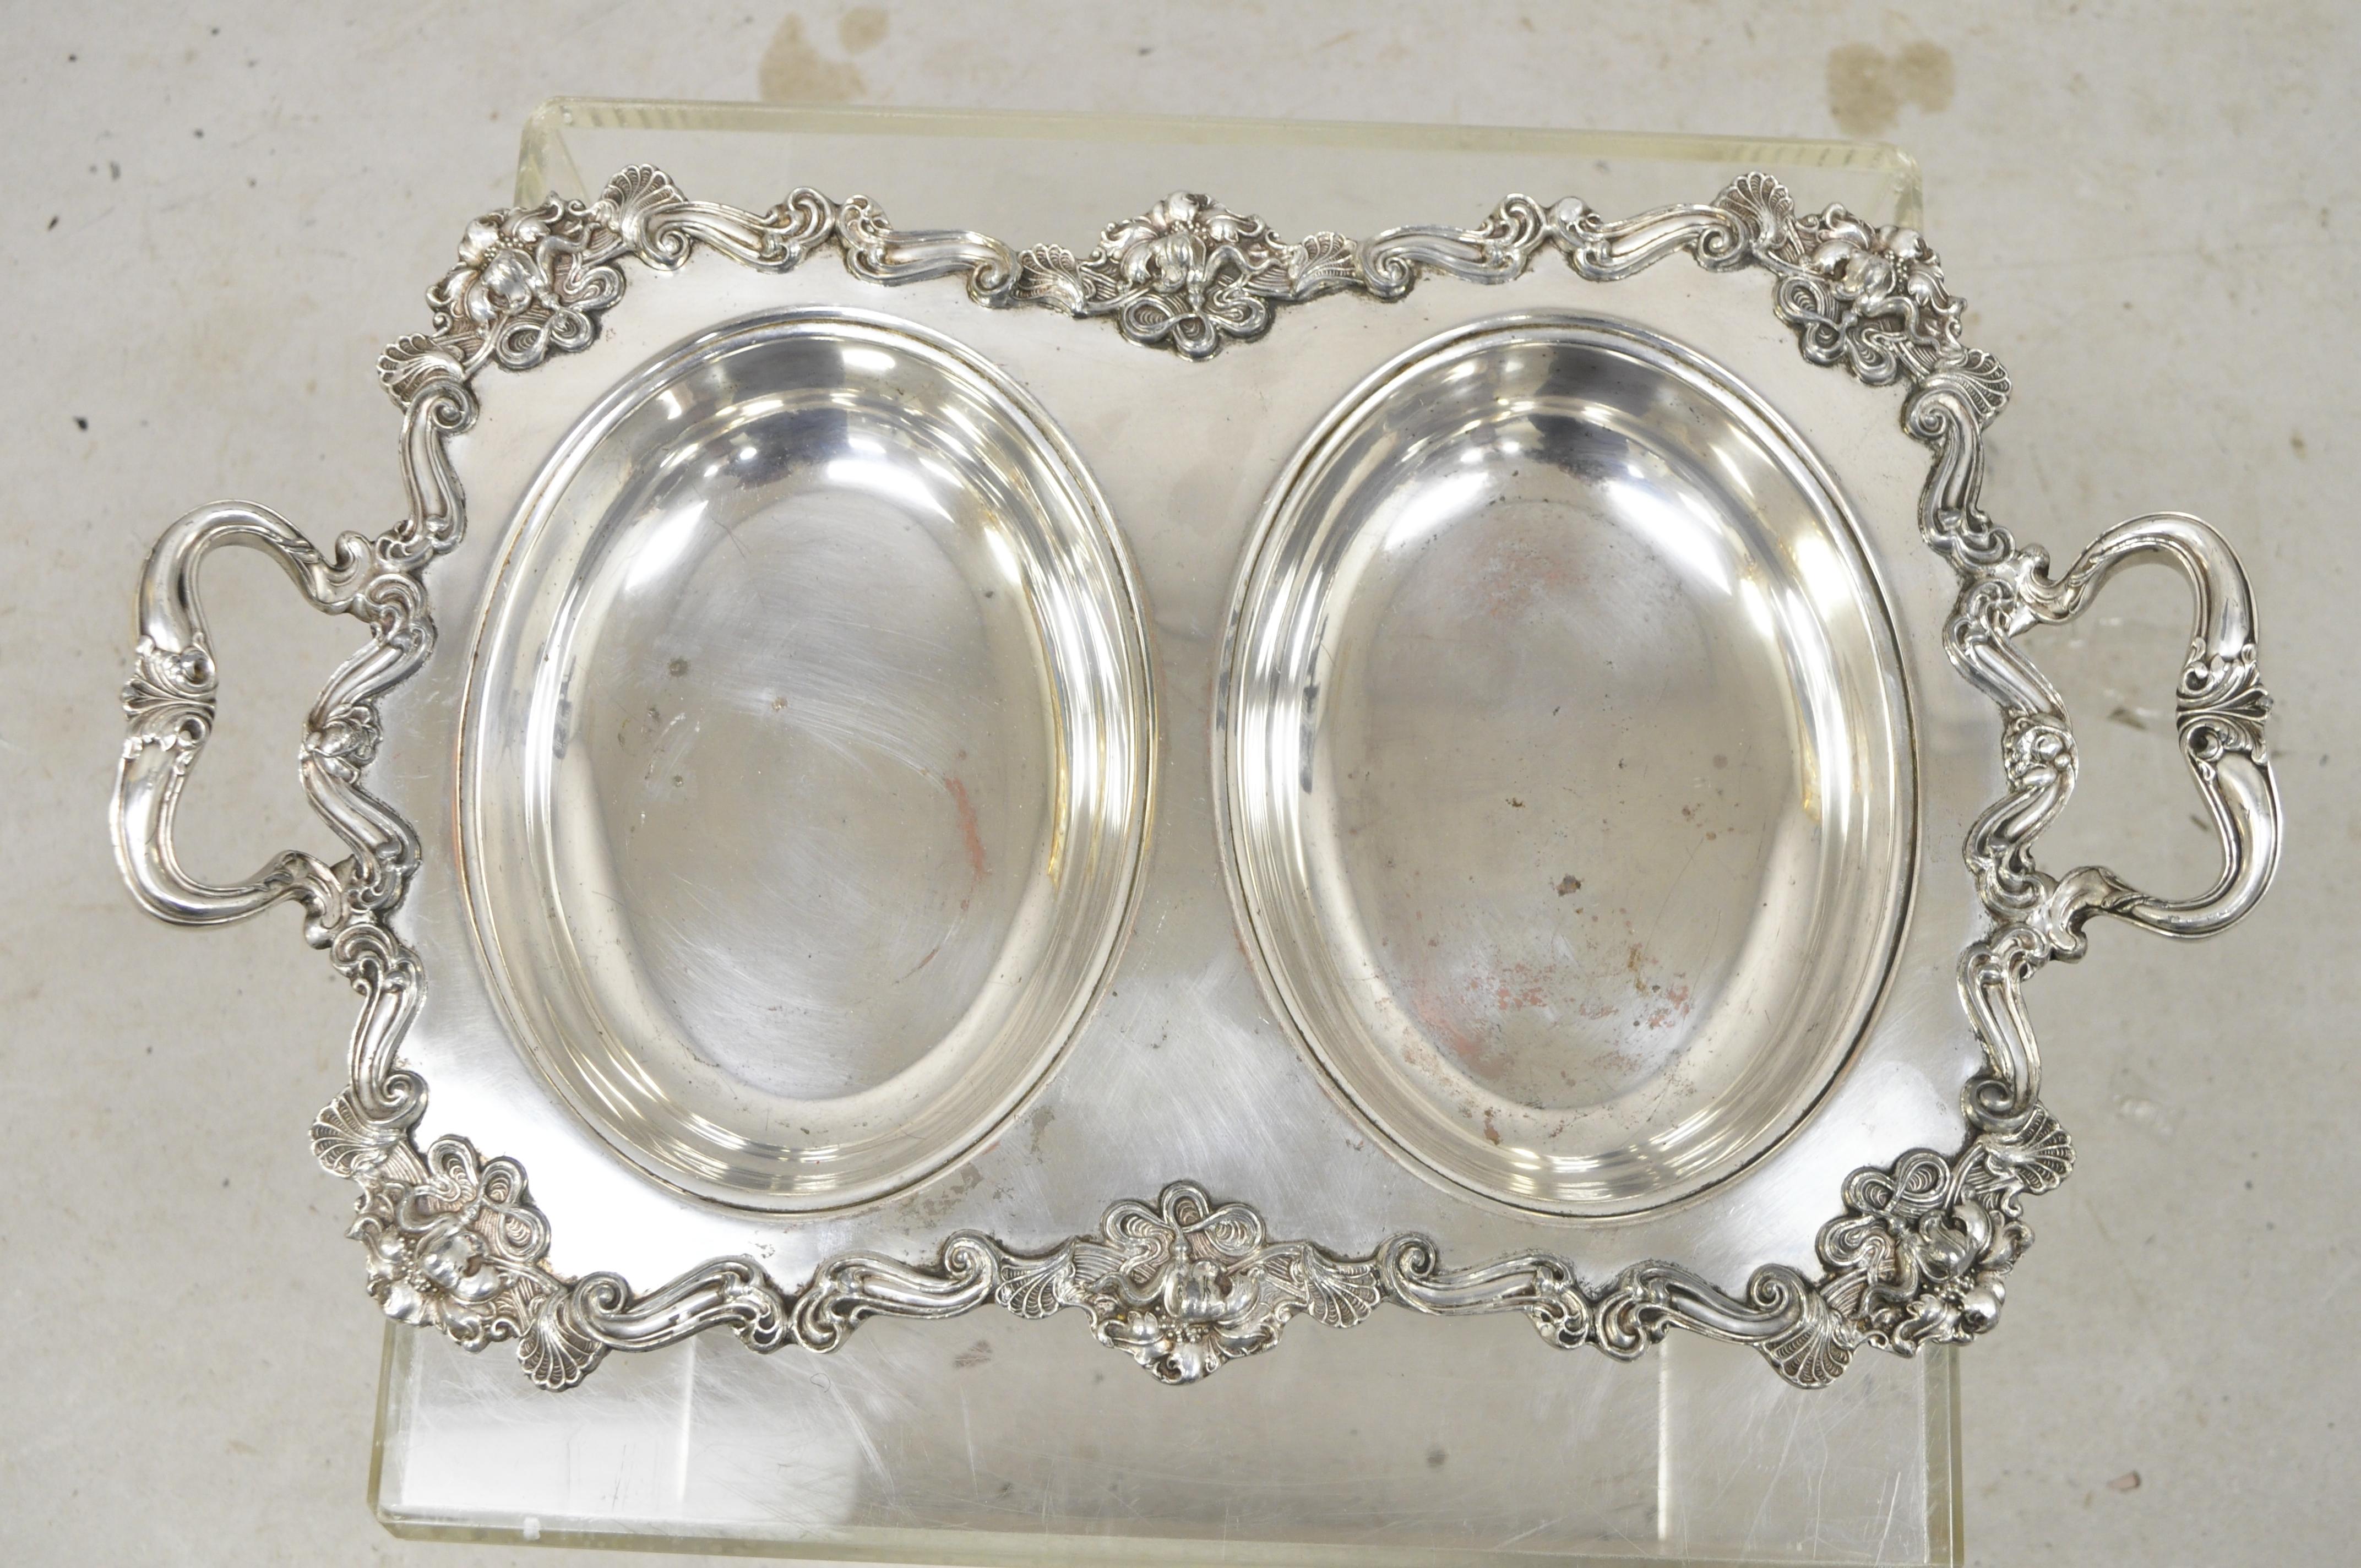 French Art Nouveau Silver Plate Double Side Serving Dish Platter Tray with Lids 4